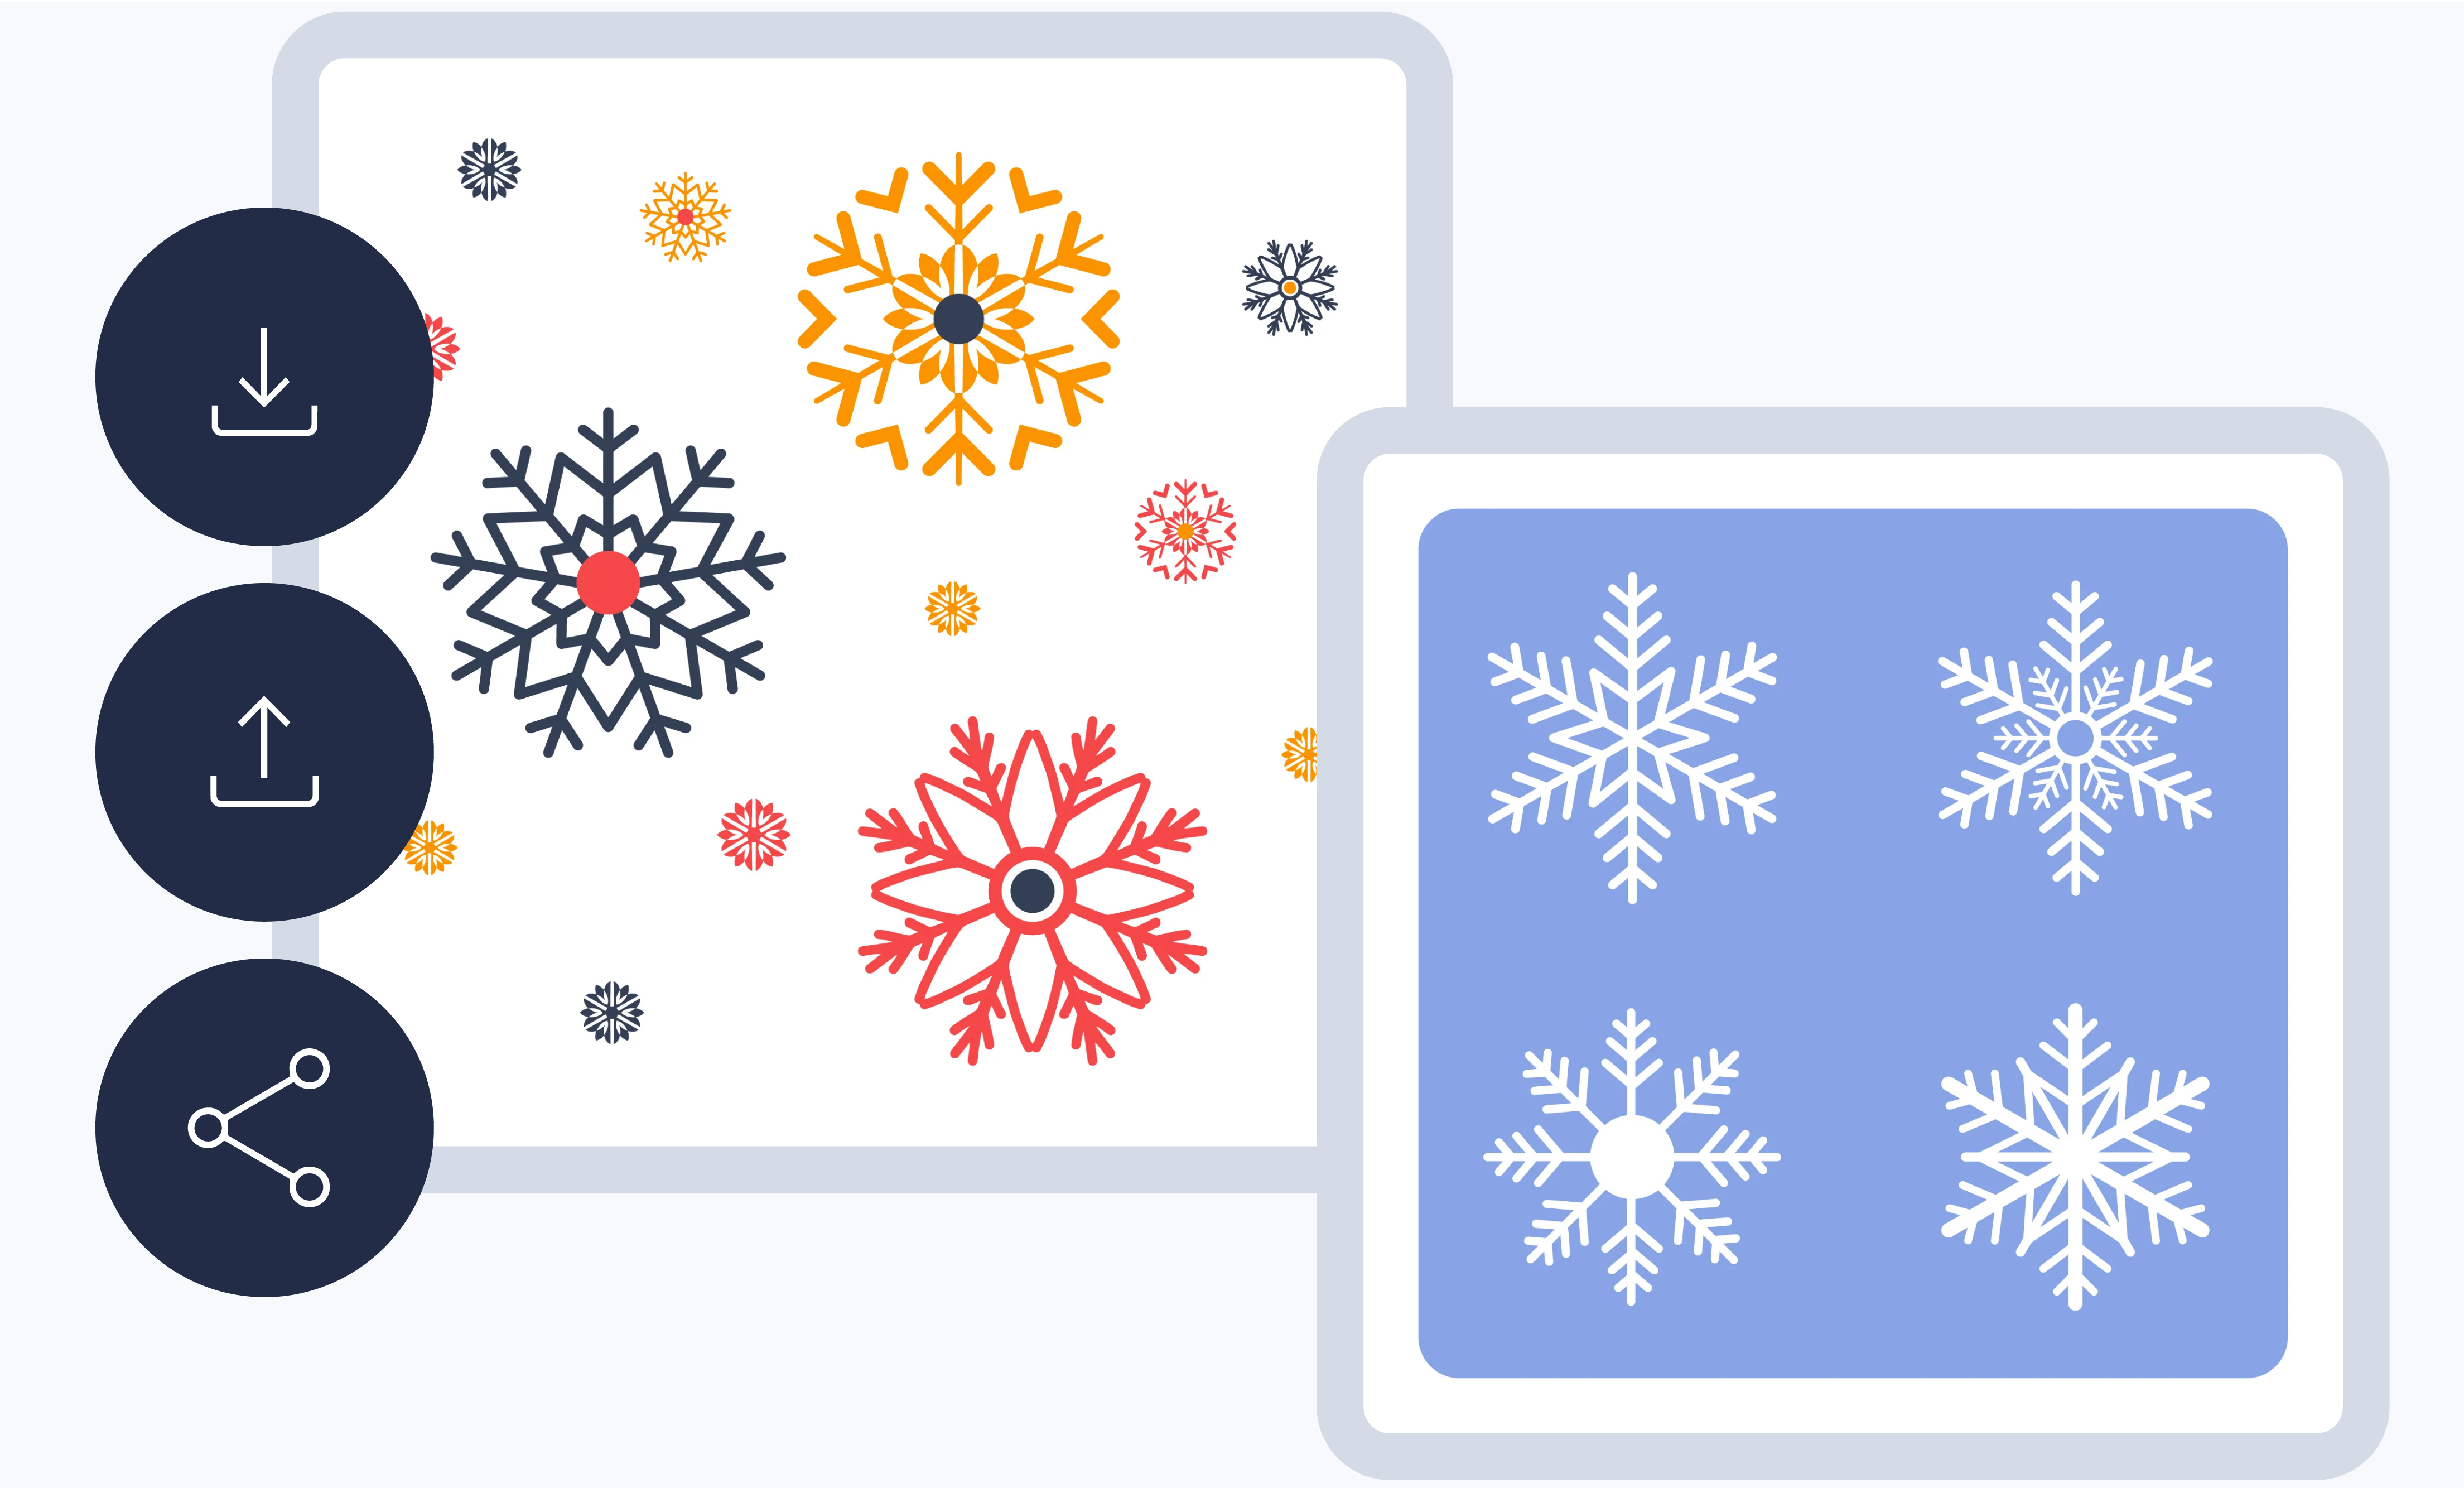 Download Snowflake without Watermark